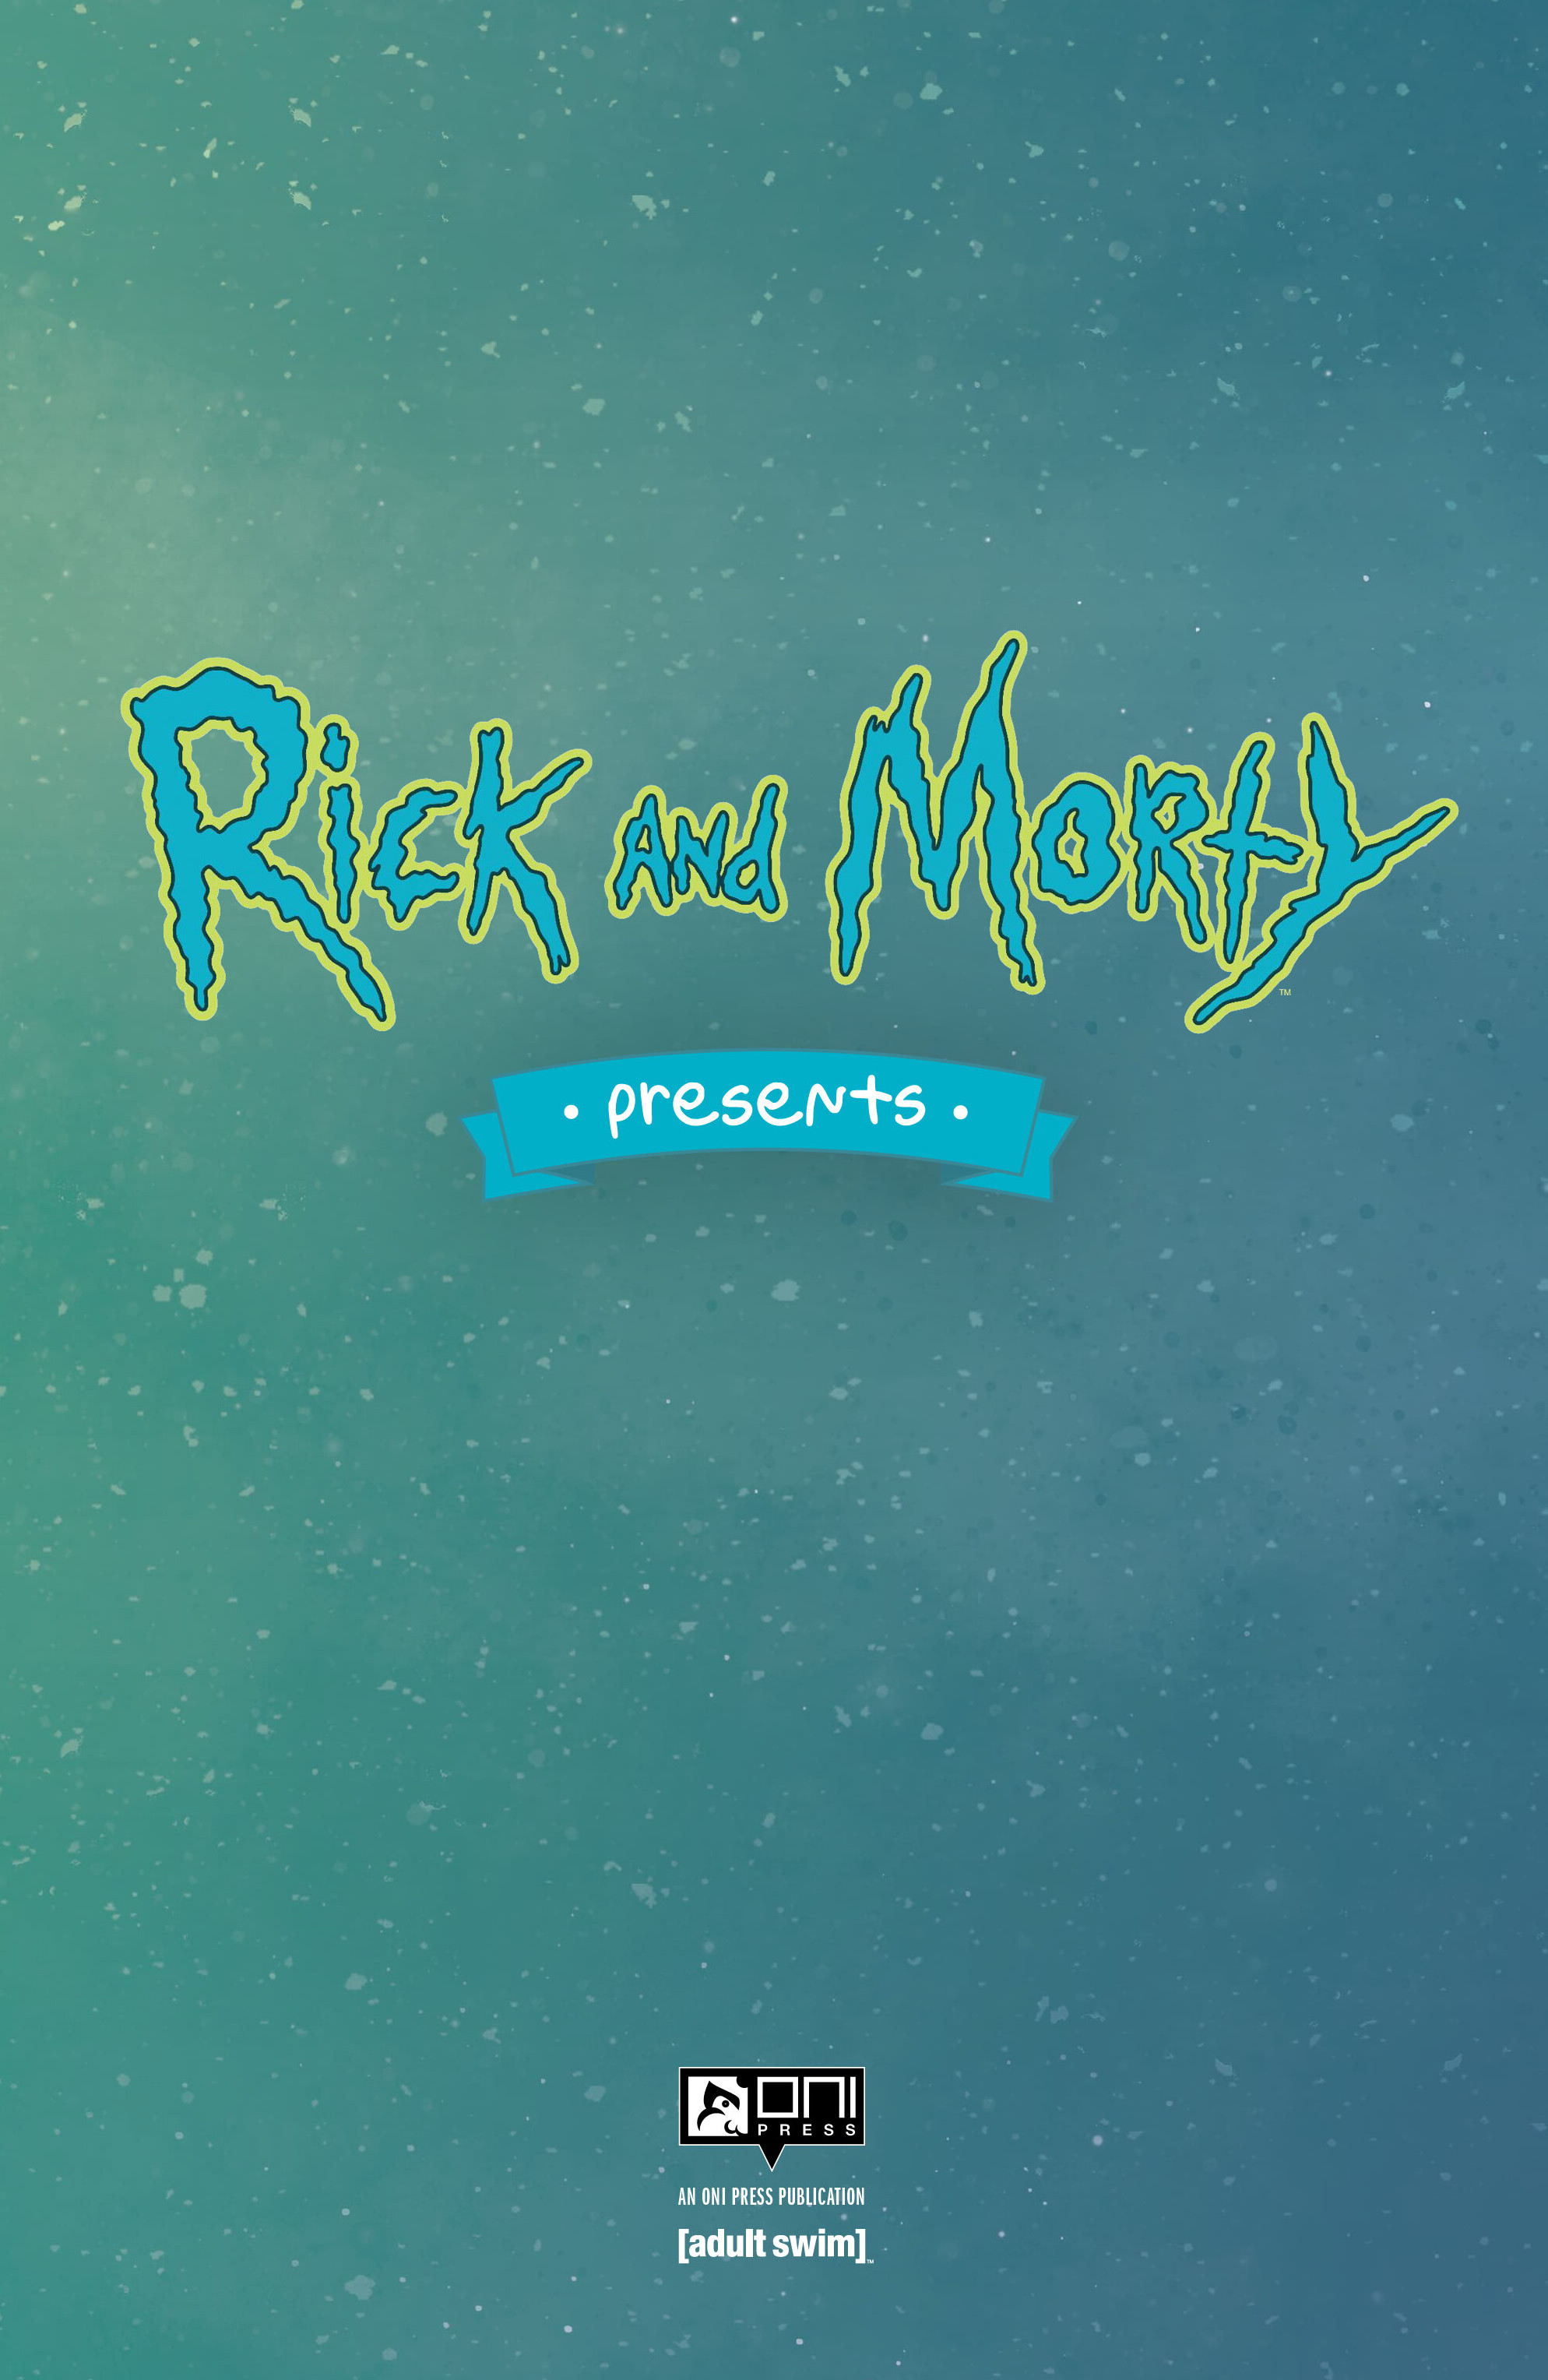 Read online Rick and Morty Presents comic -  Issue # TPB 4 - 2